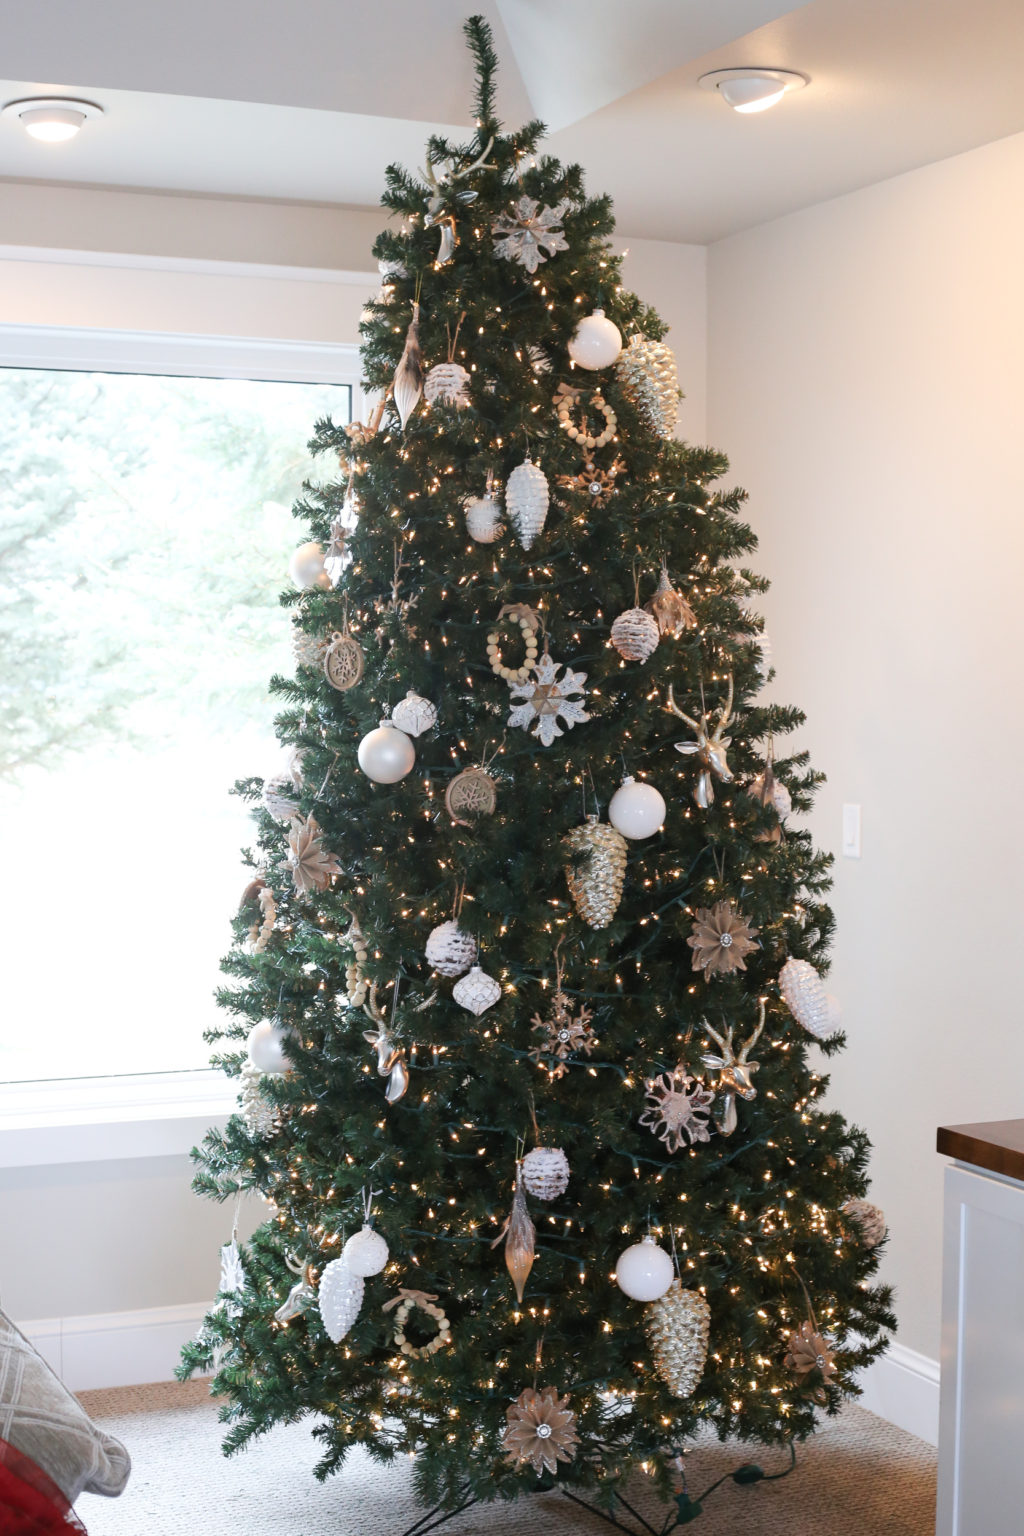 Christmas Tree Decorations & Themes - The Unlikely Hostess